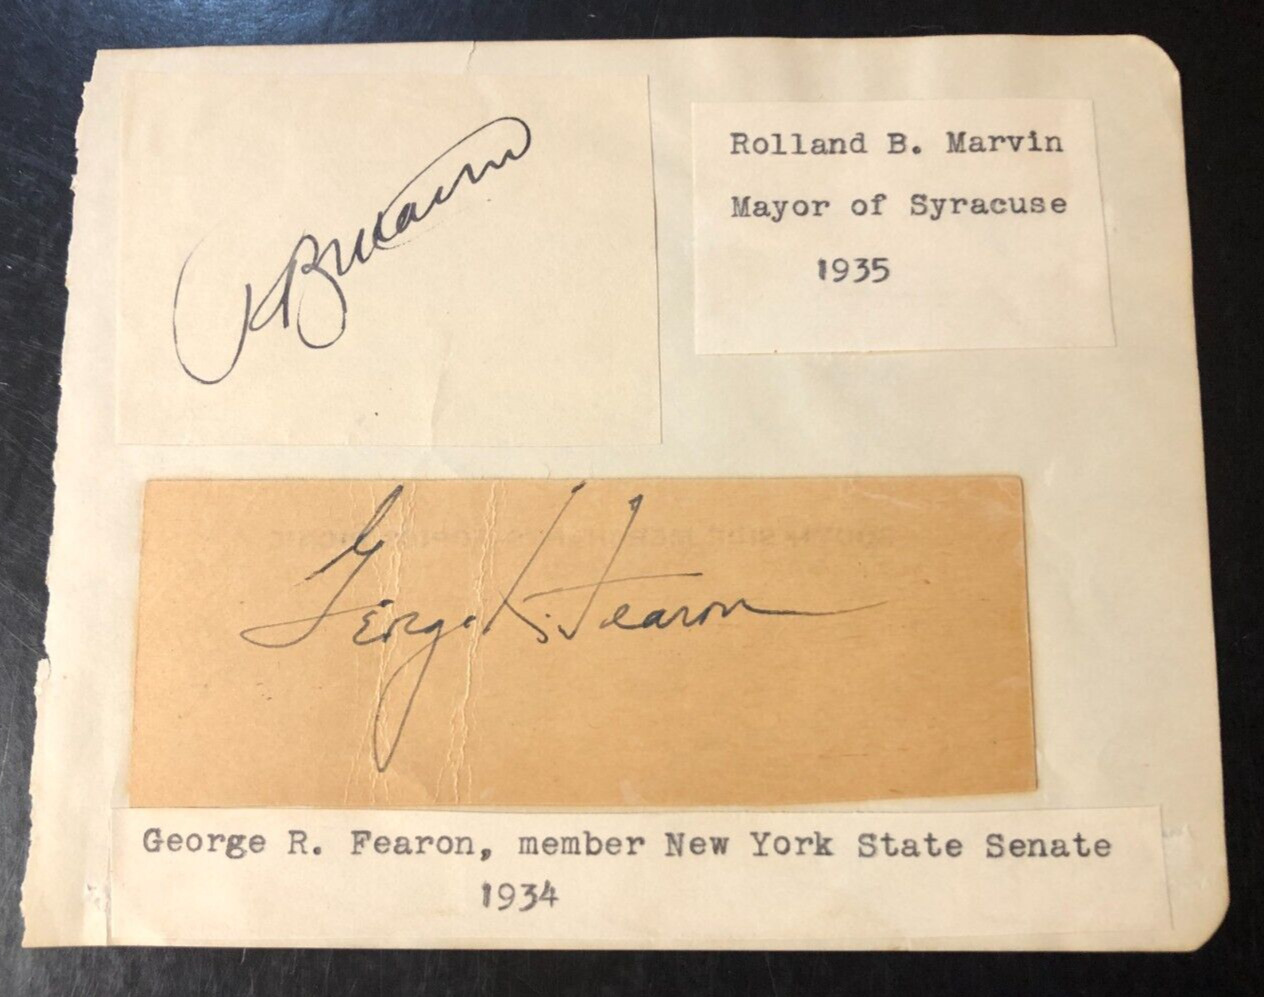 1930s Album Page with signatures of the Mayor of Syracuse and a NY State Senator